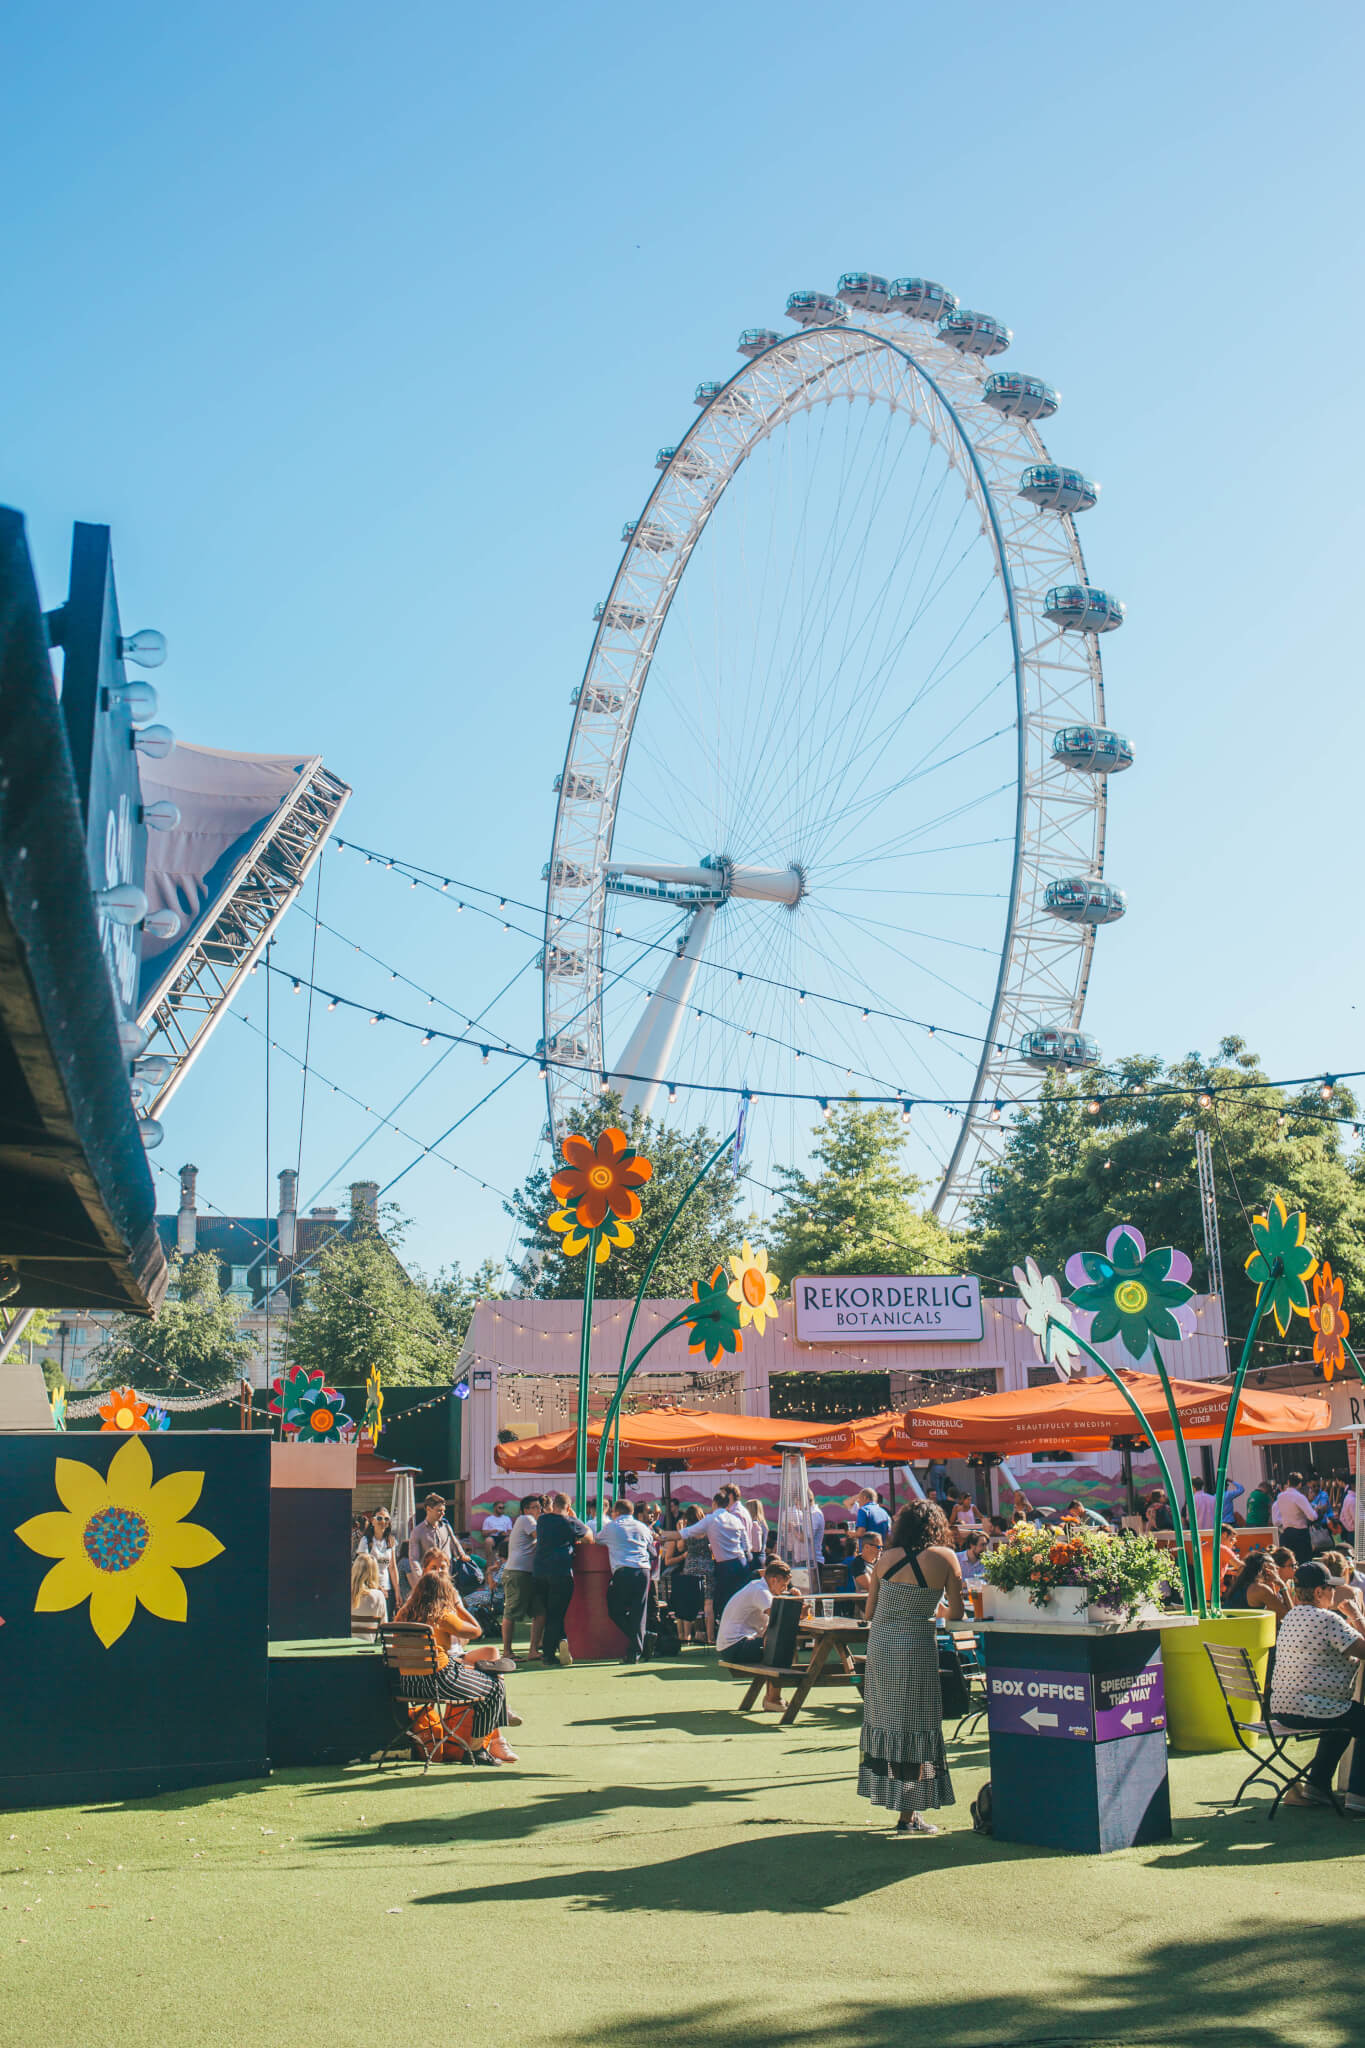 Rekorderlig-Botanicals-Bar-9-of-10 What to do in London this summer